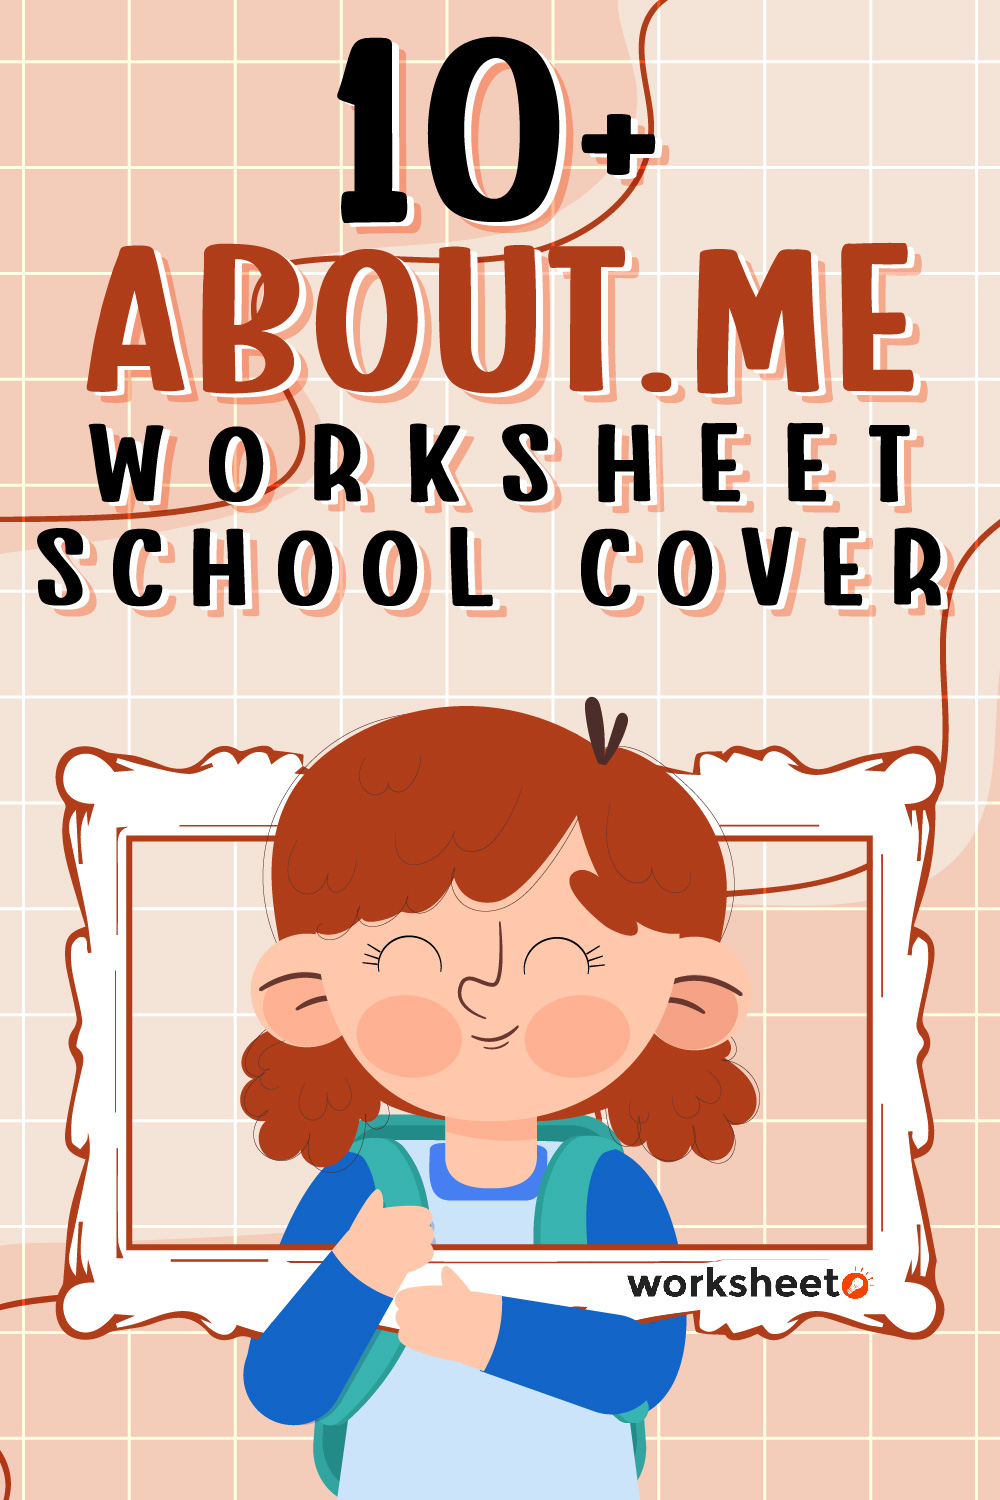 19 Images of About.me Worksheet School Cover